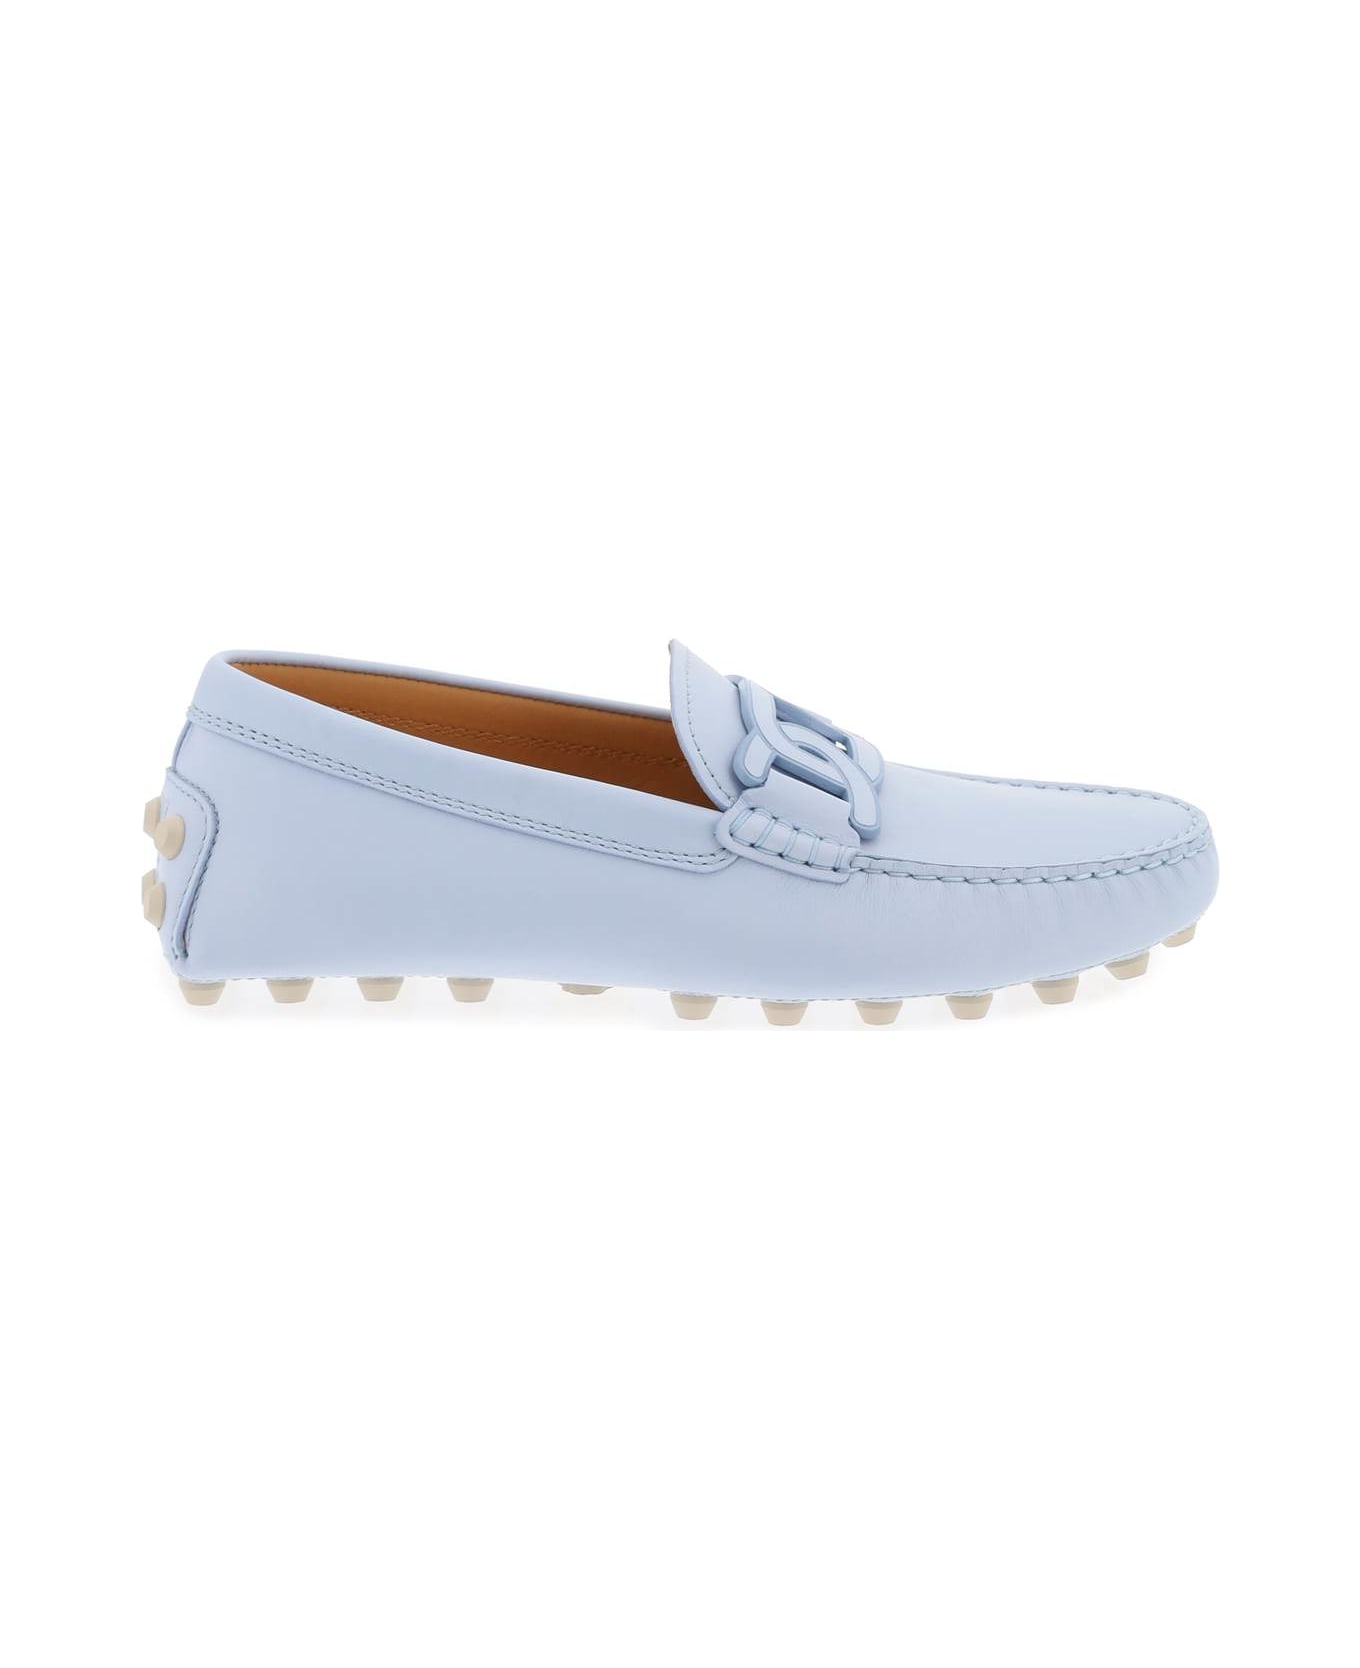 Tod's Gommino Bubble Loafers - AIR (Light blue) フラットシューズ